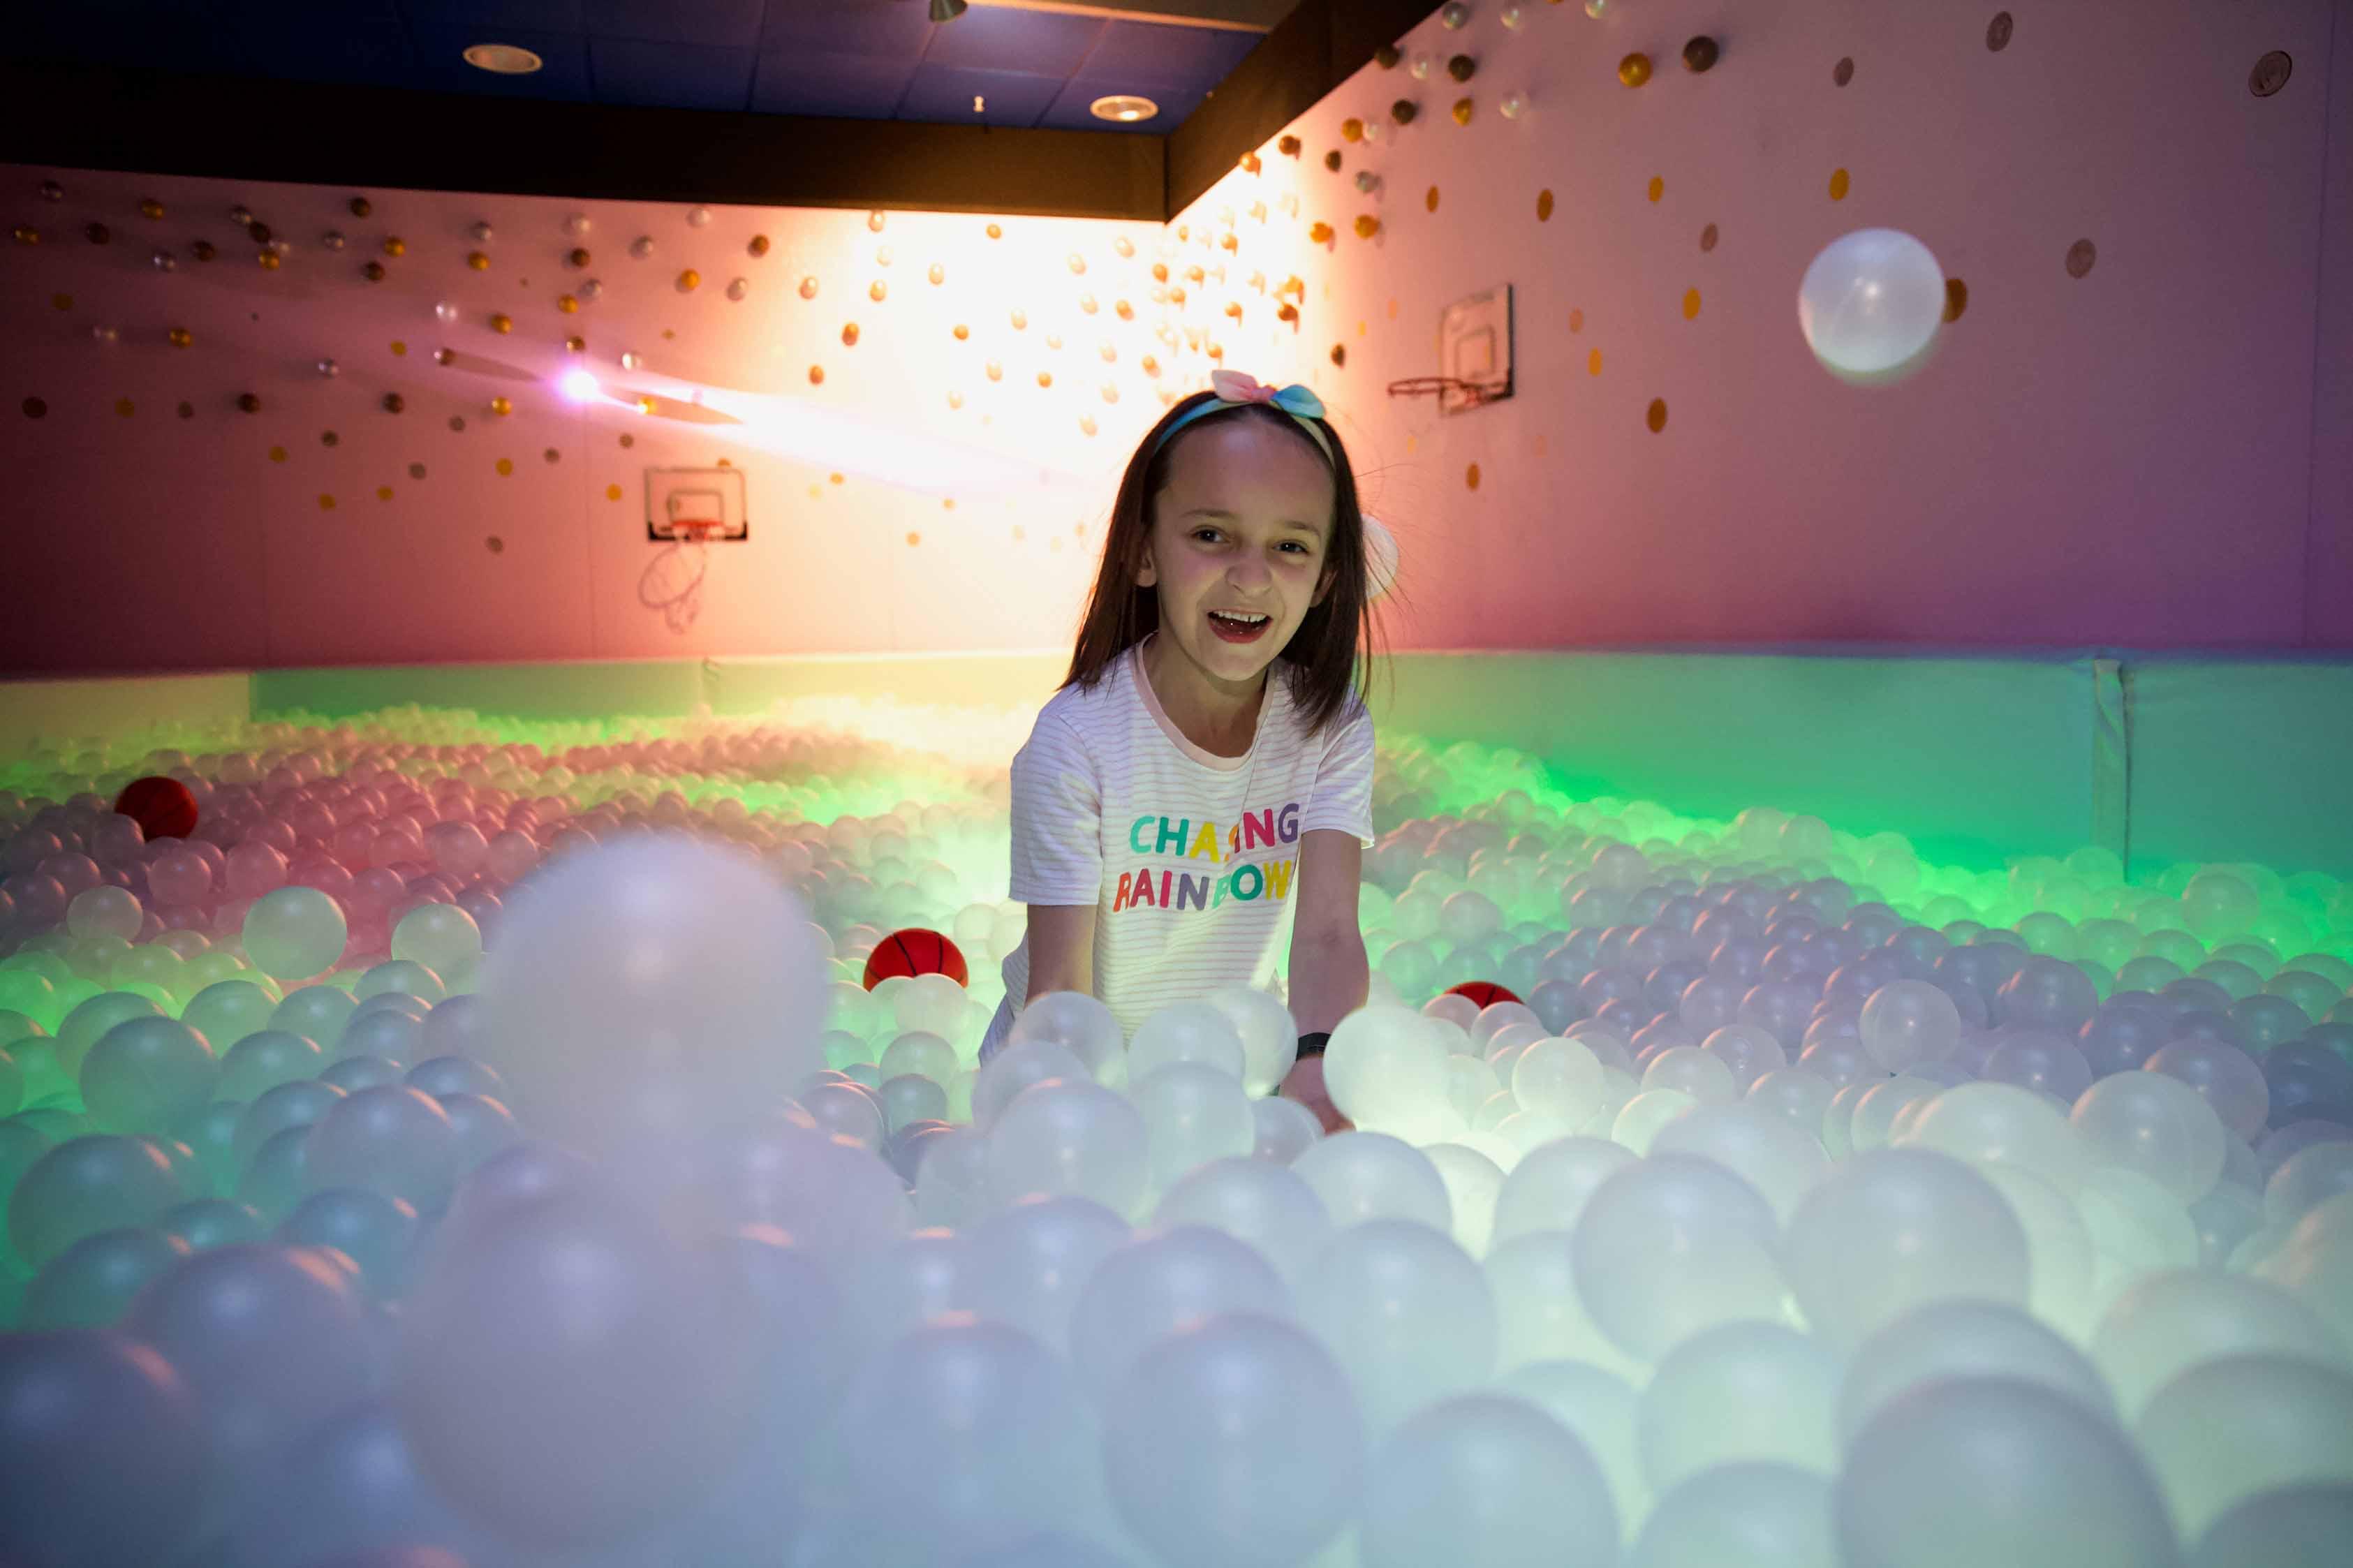 Ball Pit - The Chocolate Factory in Manchester